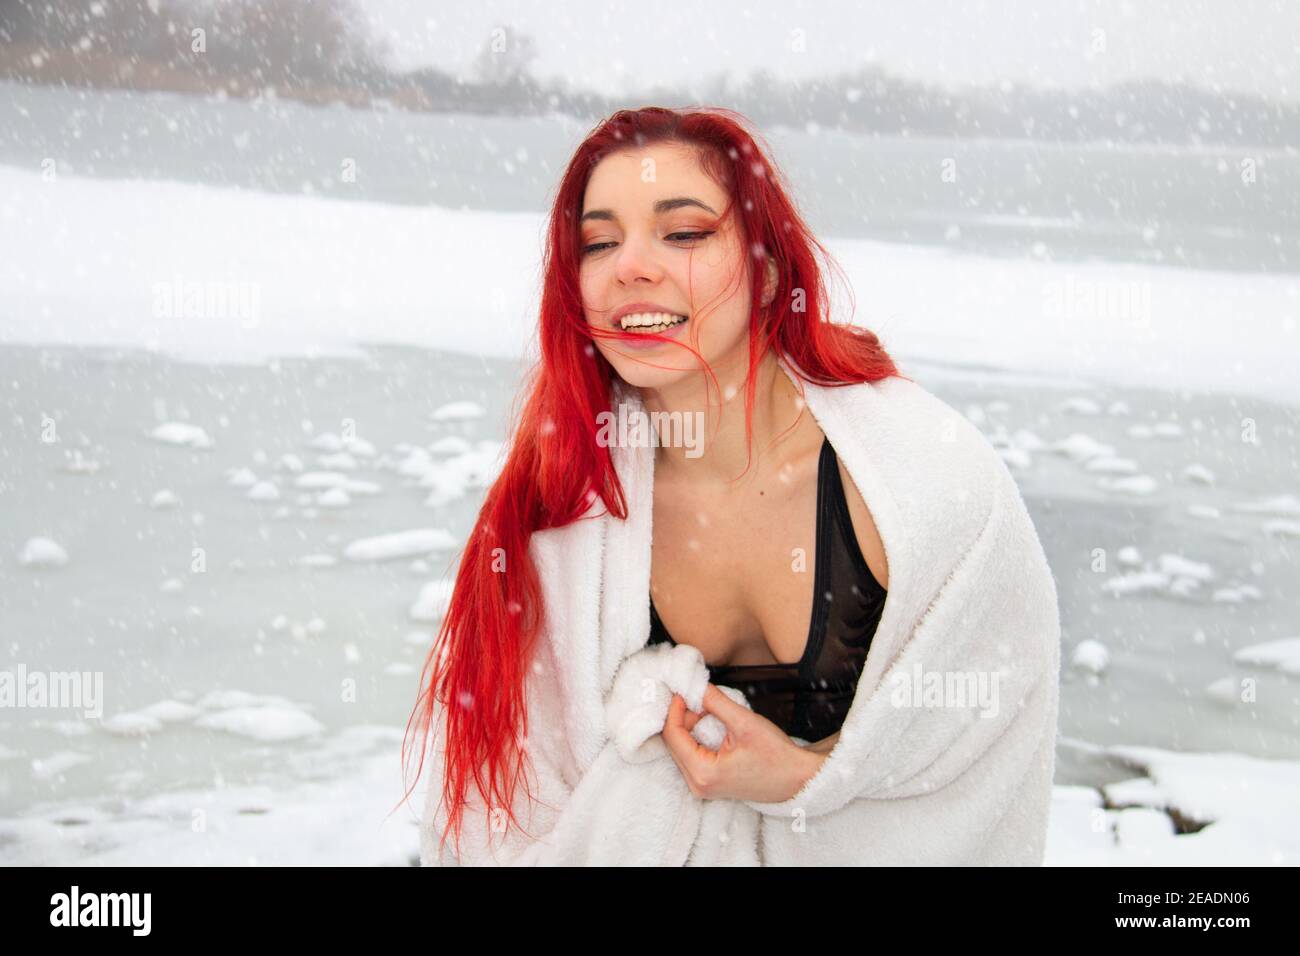 Snowy winter portrait of red hair woman outdoors in a bathing suit, wrapped in a towel at open water swimming lake, cold therapy and hardening on snow Stock Photo